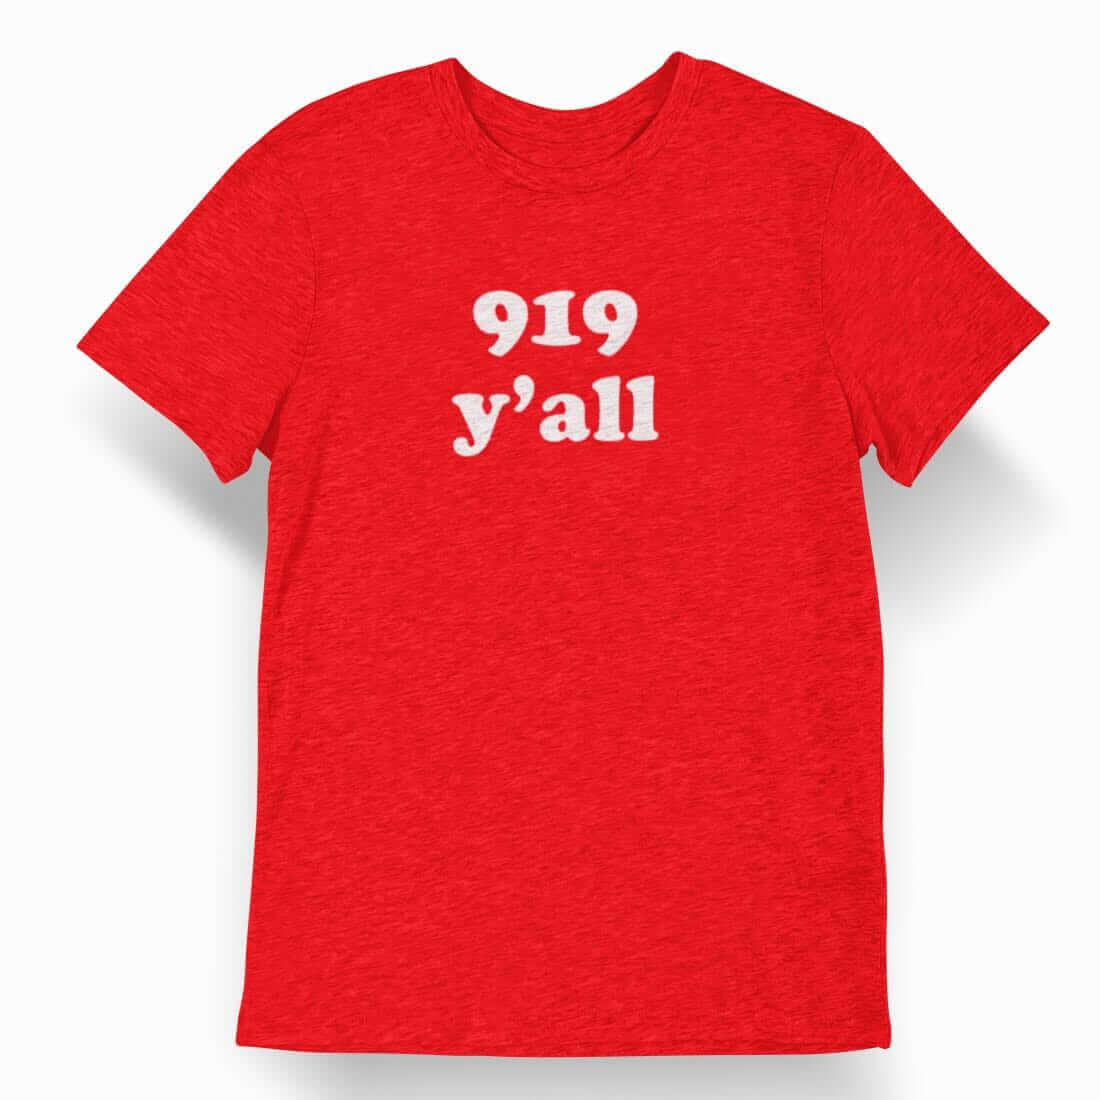 919 Y'all Shirt SHIRT HOUSE OF SWANK